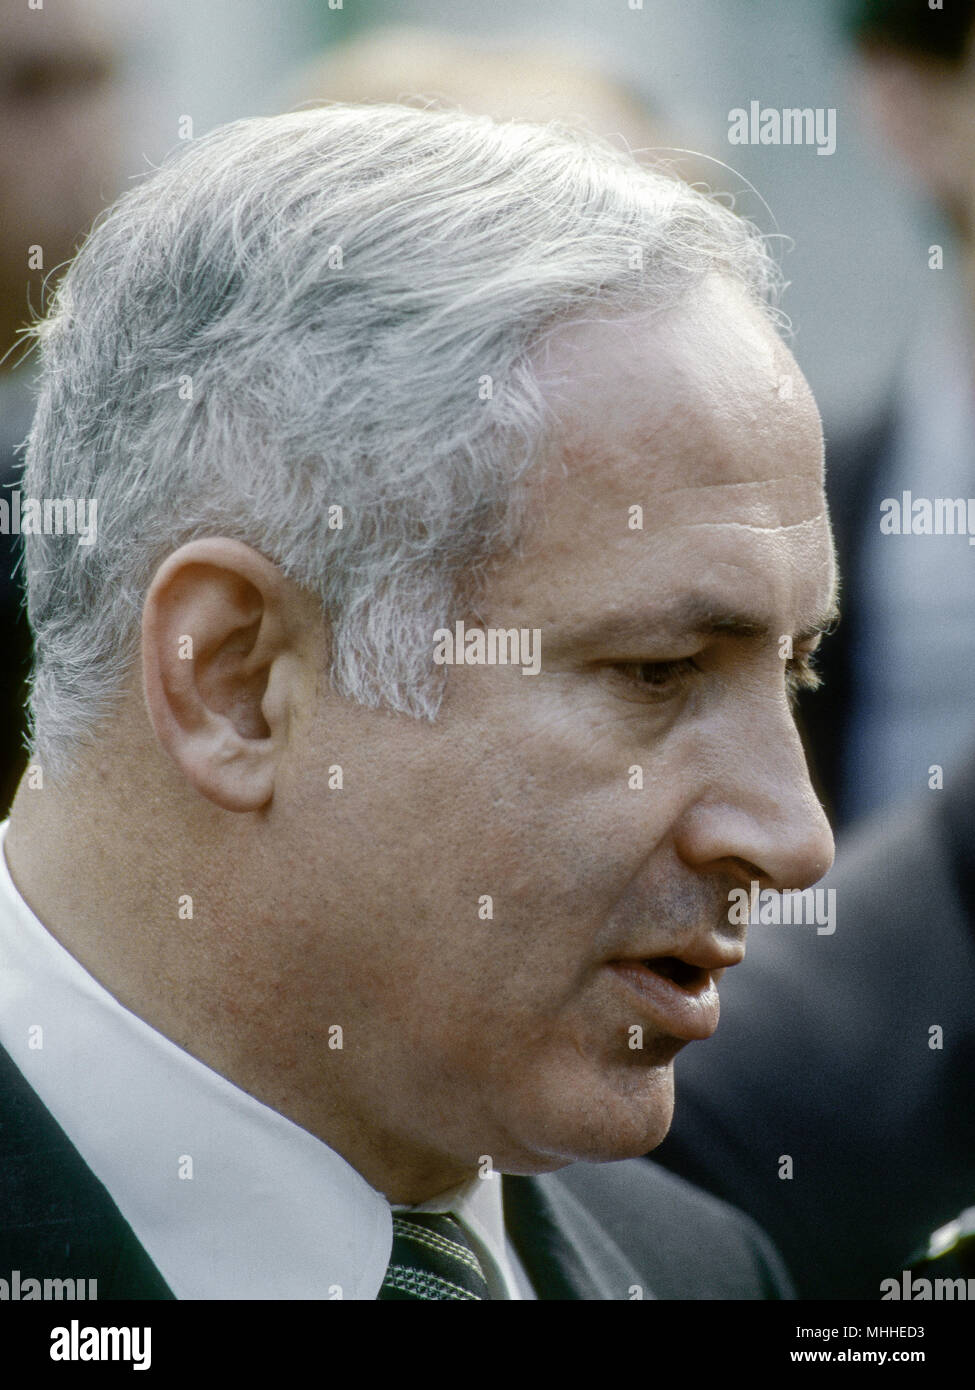 Washington, DC. USA, 9th July 1996  Israeli Prime Minister Benjamin Netanyahu speaks with reporters in the West Wing driveway of the White House during his visit to meet with President William Clinton. Benjamin 'Bibi' Netanyahu is the current Prime Minister of Israel. He also currently serves as a member of the Knesset and Chairman of the Likud party. Born in Tel Aviv to secular Jewish parents, Netanyahu is the first Israeli prime minister born in Israel after the establishment of the state. Stock Photo